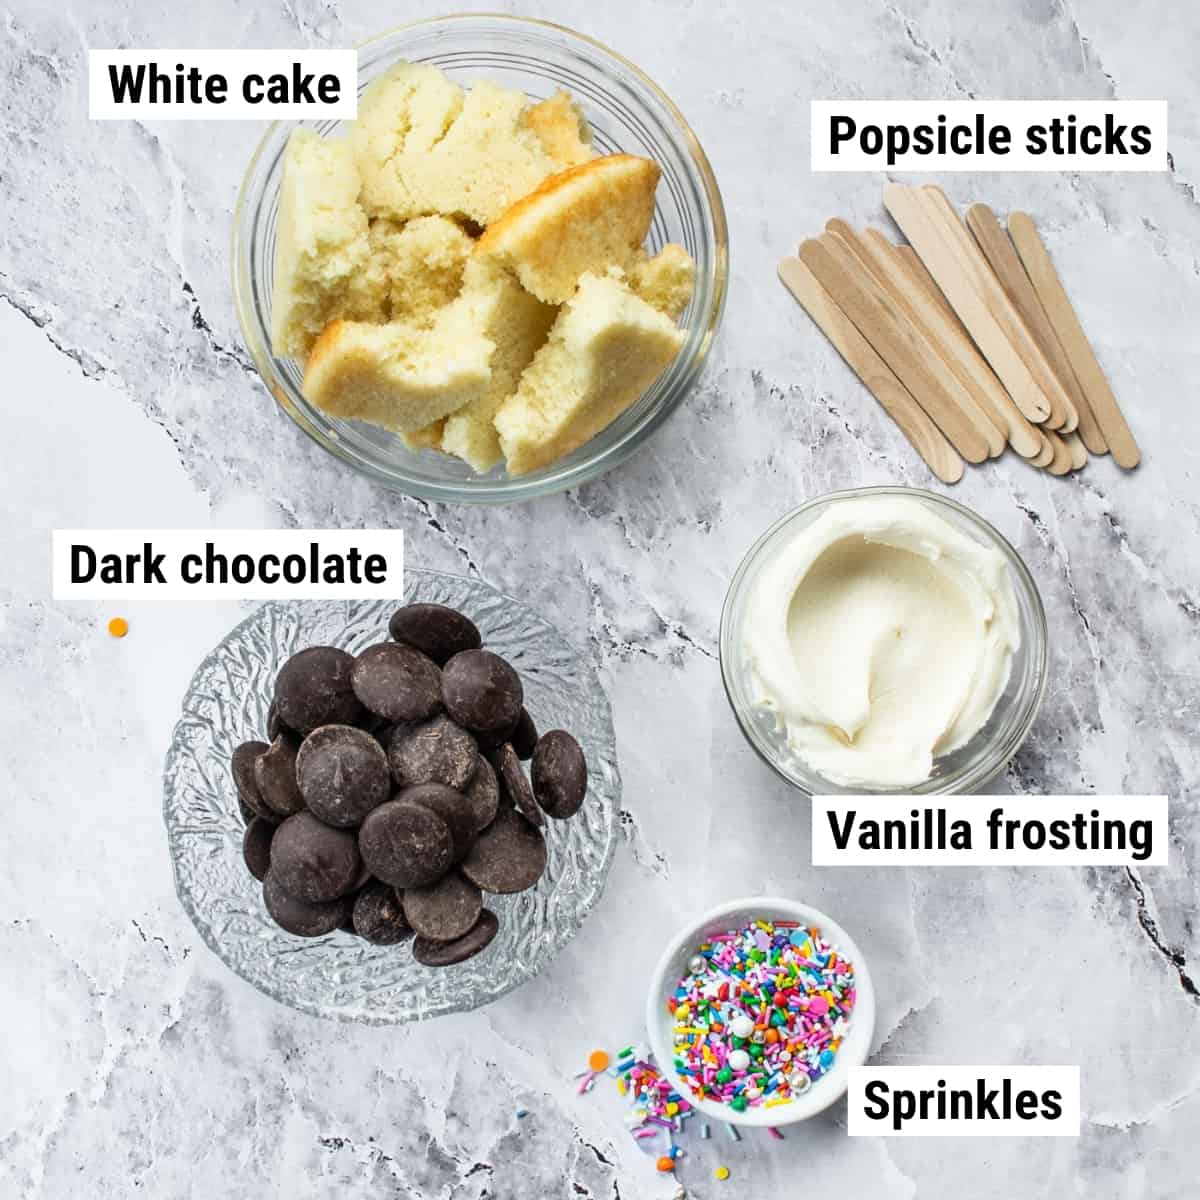 The ingredients used to make cake popsicles laid out on a table.